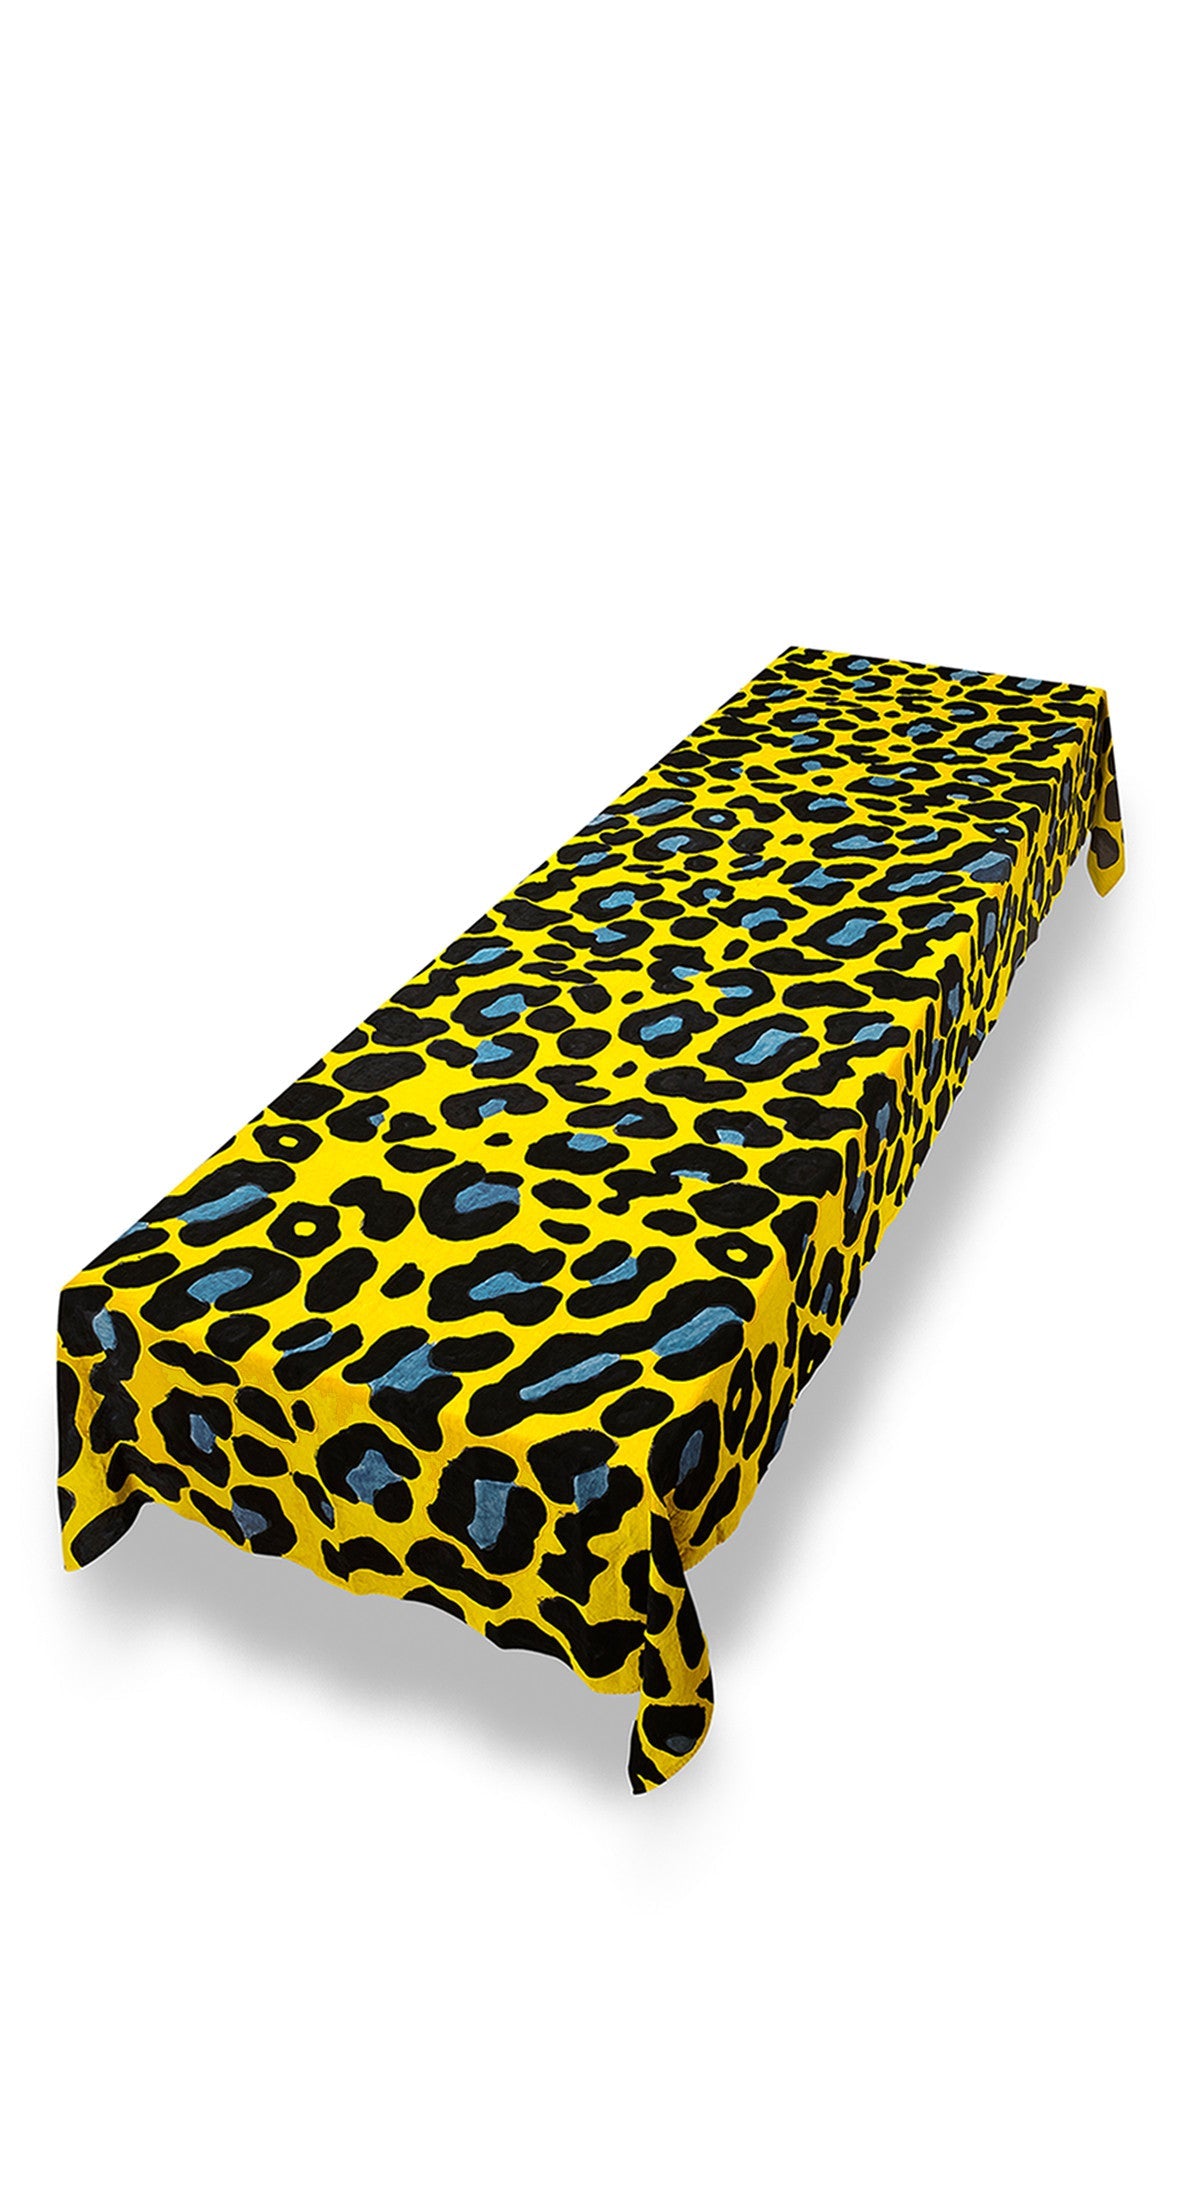 Fierce Leopard Linen Tablecloth in Lemon Yellow with Powder And Midnight Blue Spots